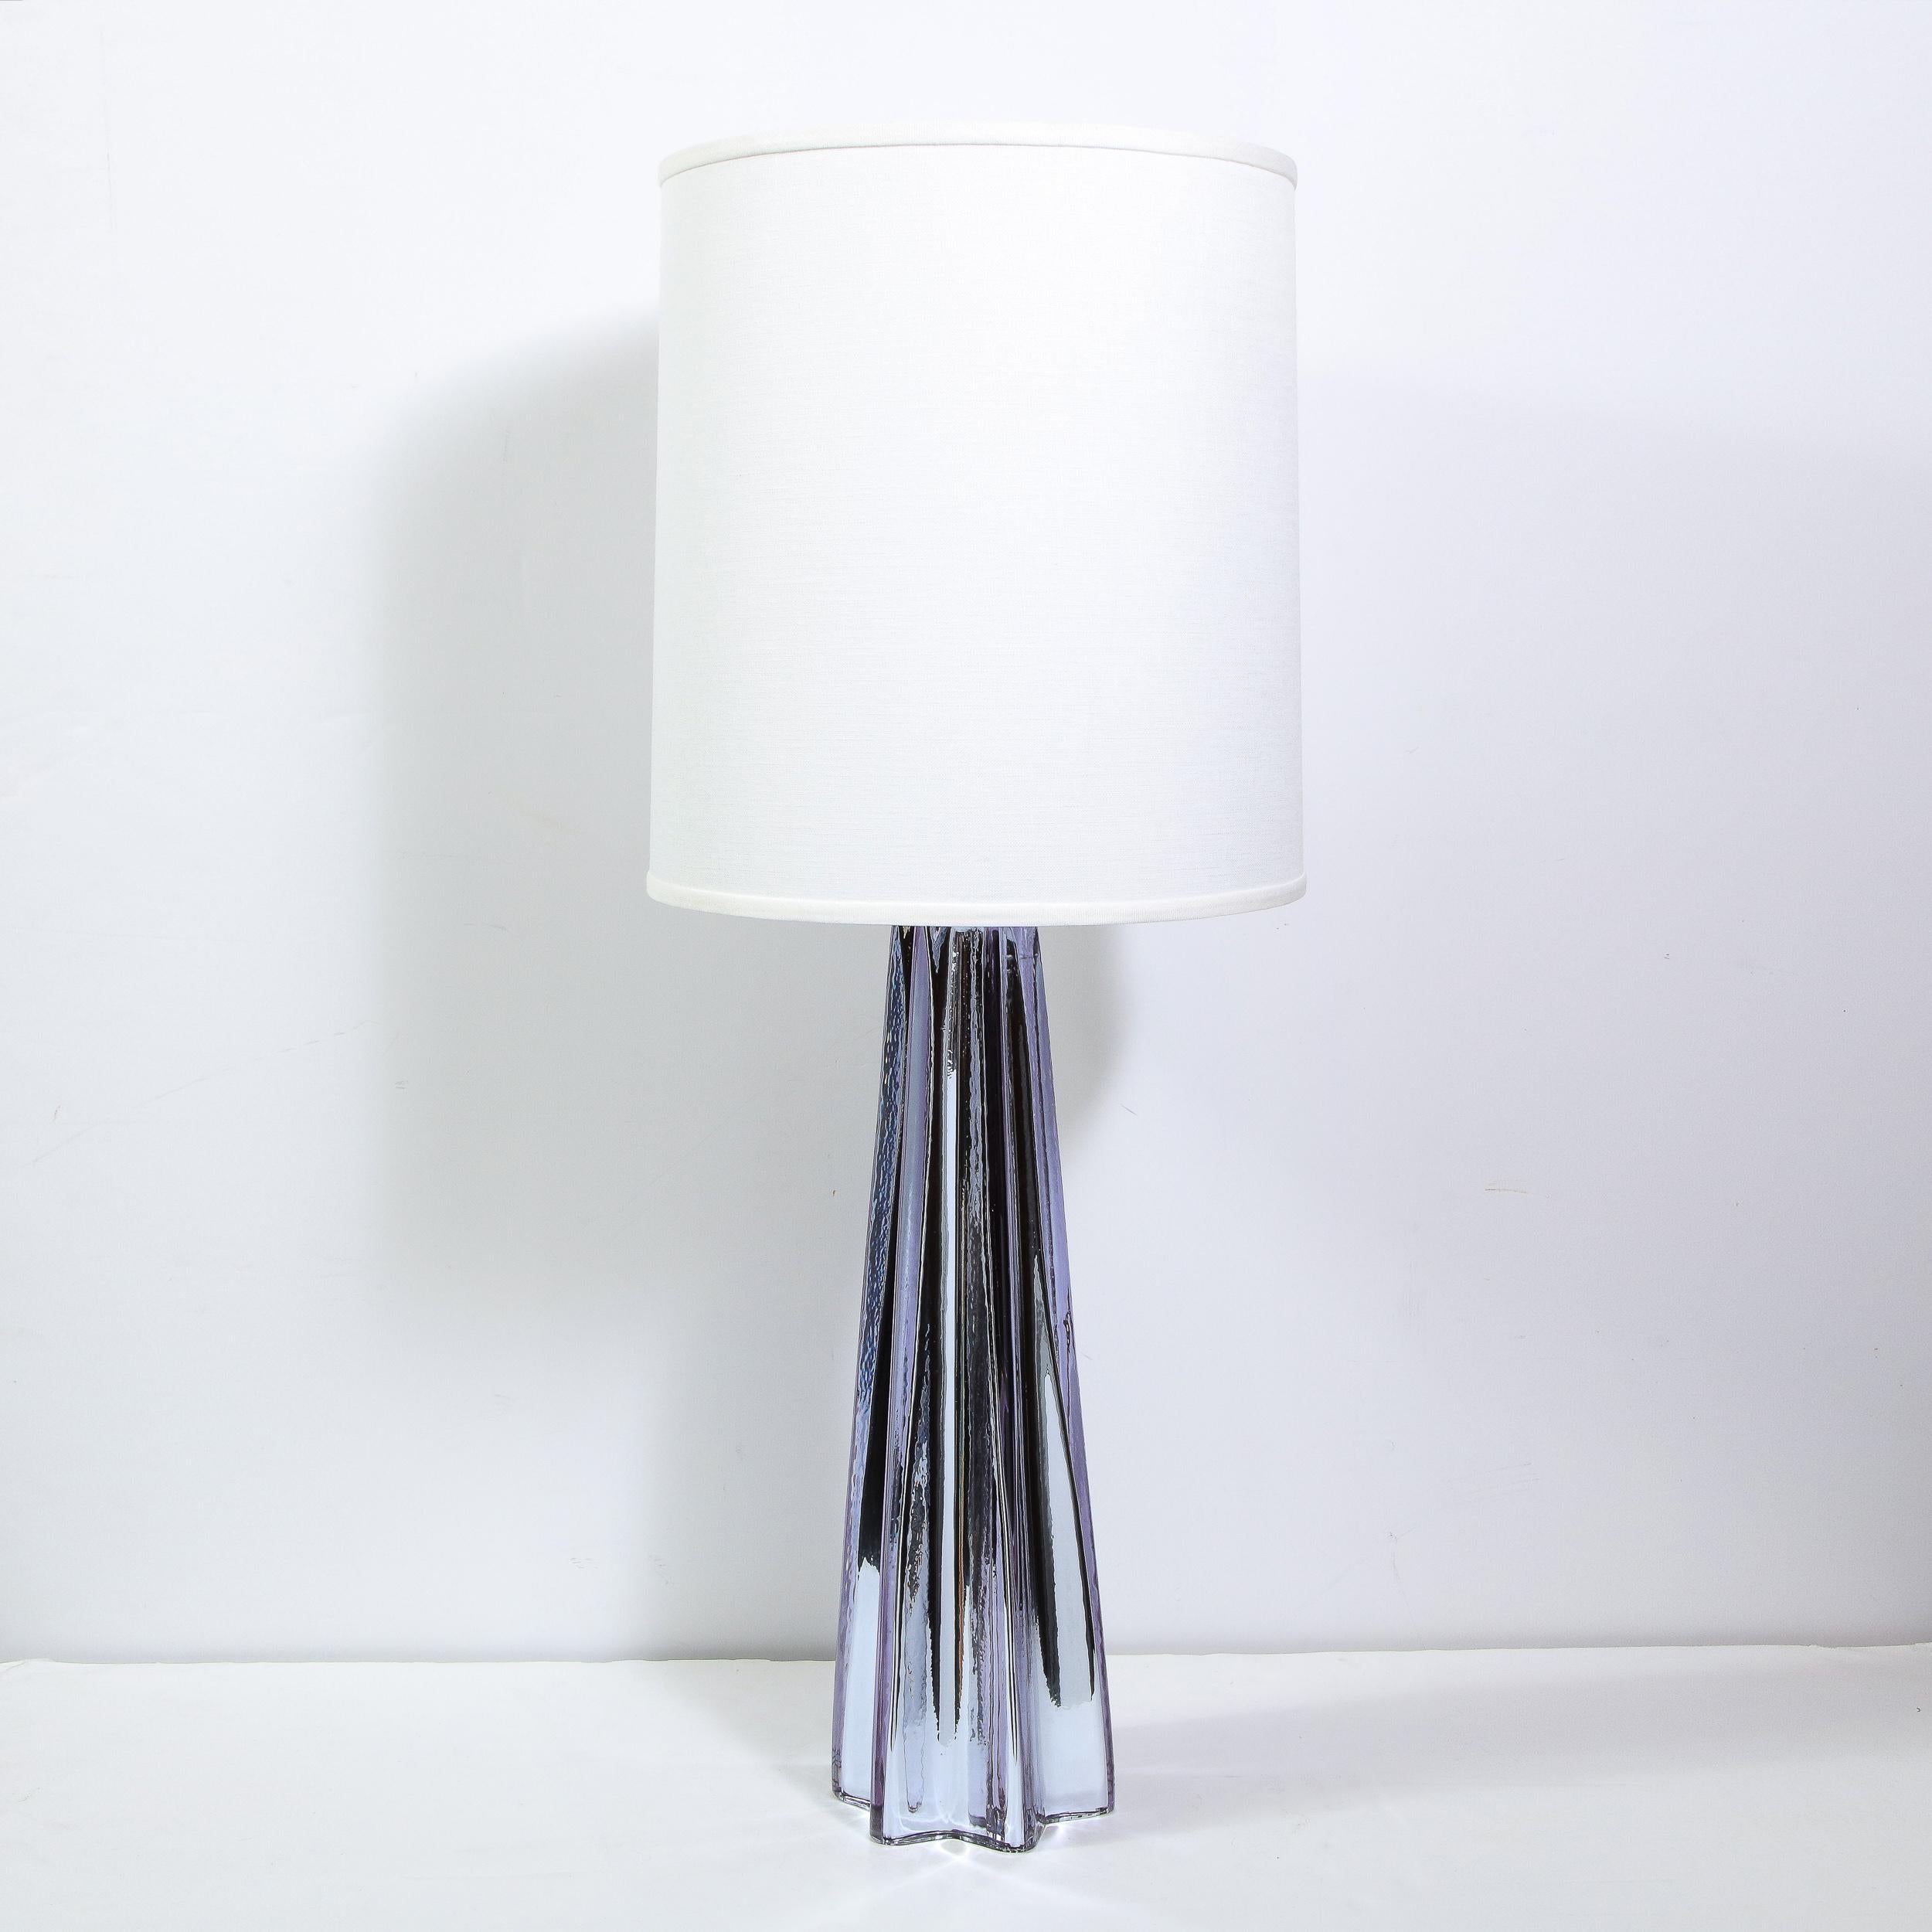 Hand blown in Murano, Italy, this stunning pair of mirrored mercury glass table lamps features a sculptural tapered x-form body in a rich lavender hue with nickel fittings that echo the silver tones found throughout the piece. With their subtle, yet